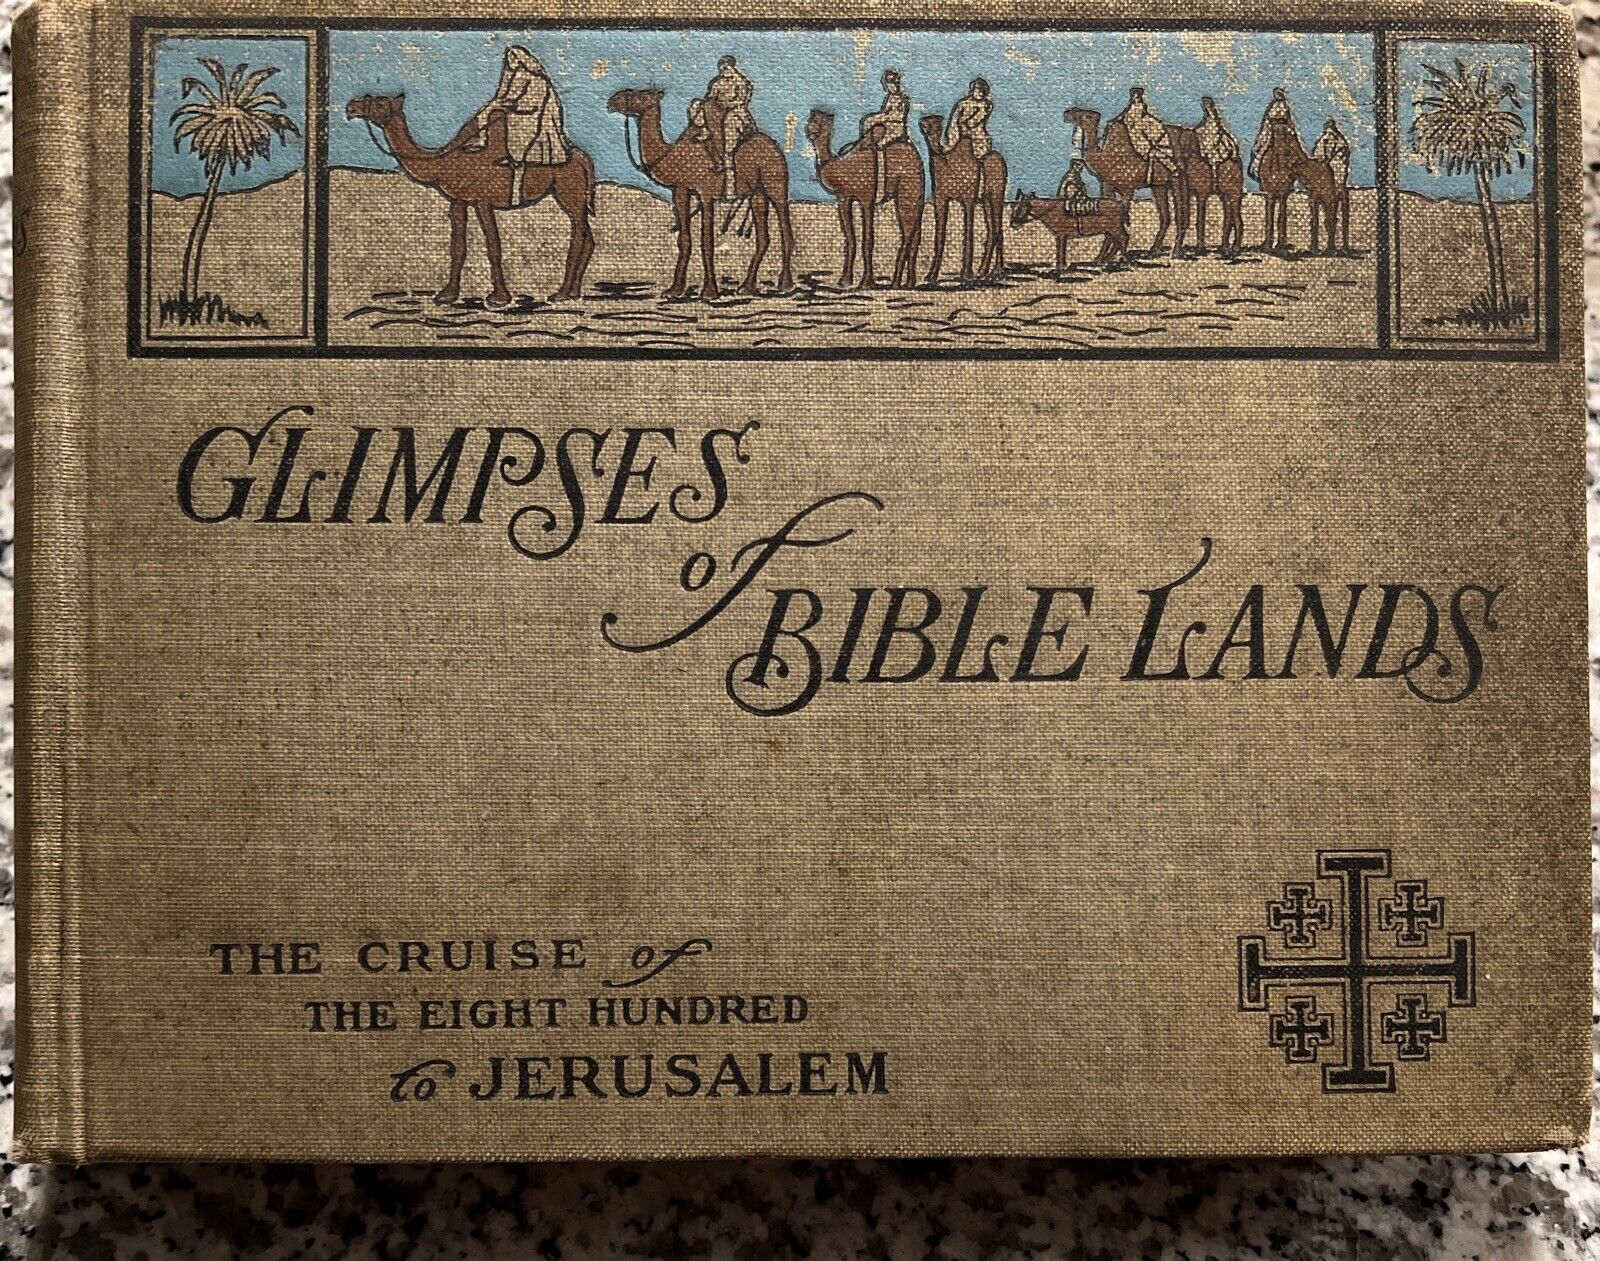 Glimpses of Bible Lands: The Cruise of the Eight Hundred to Jerusalem -Rare 1905